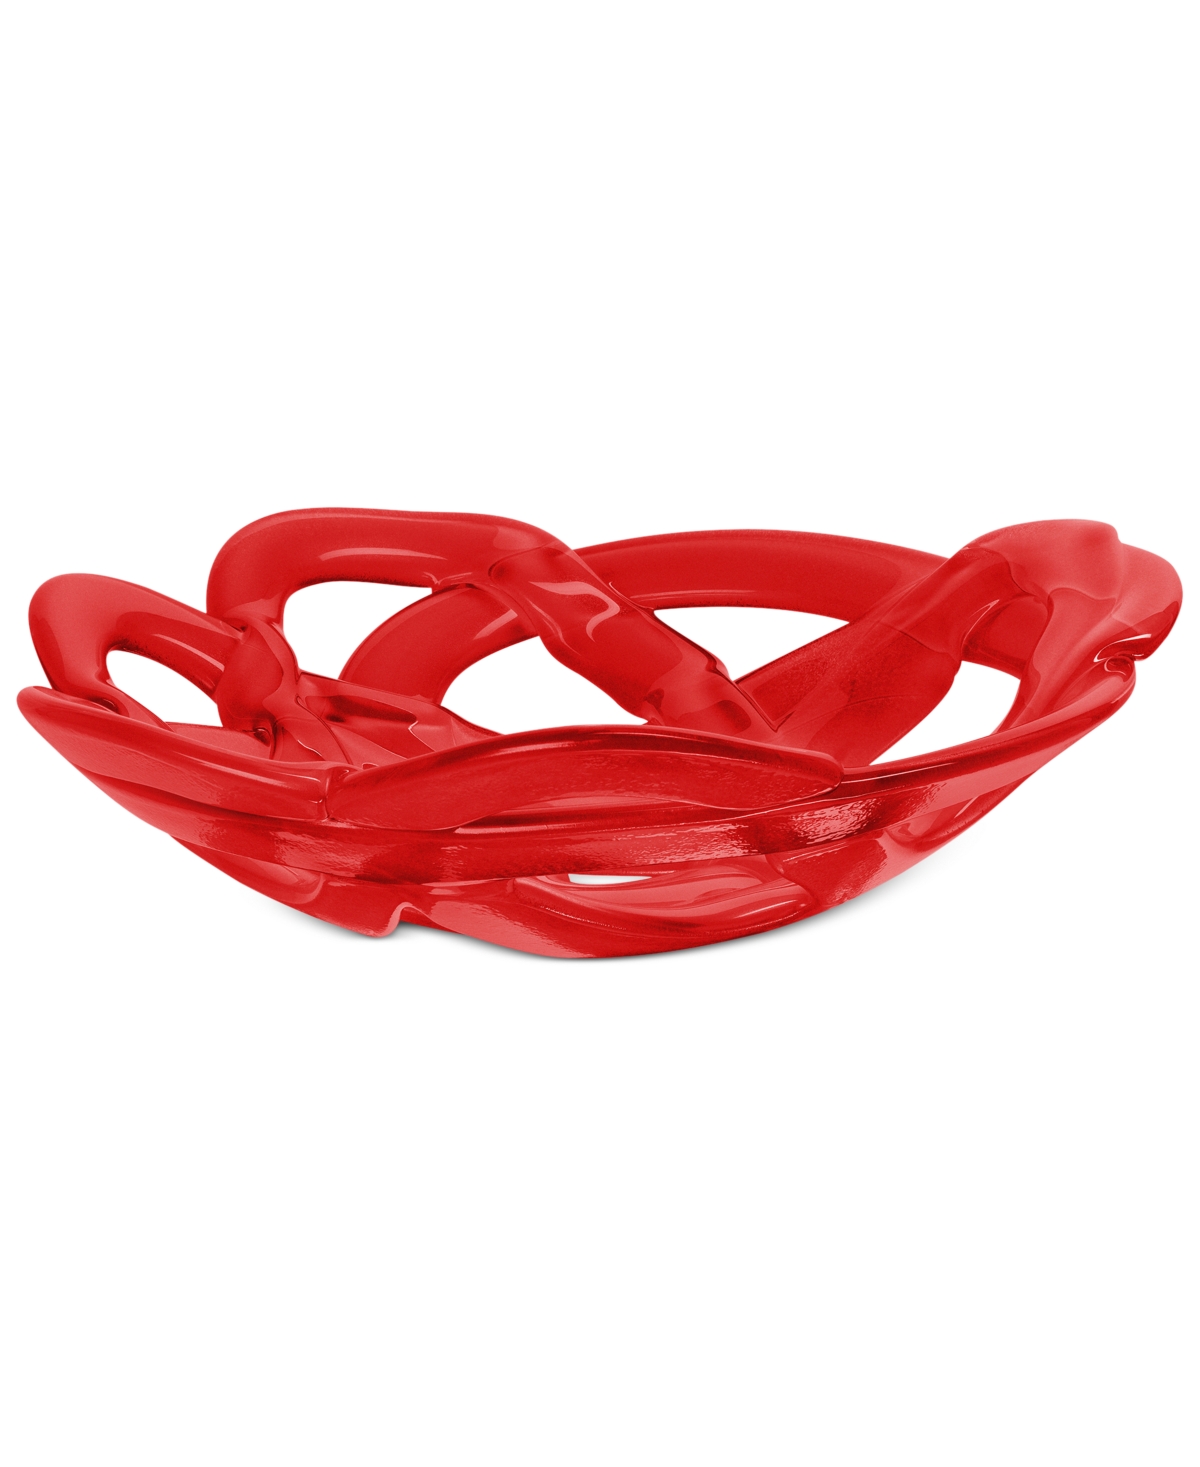 15" Colored Basket Bowl - Red